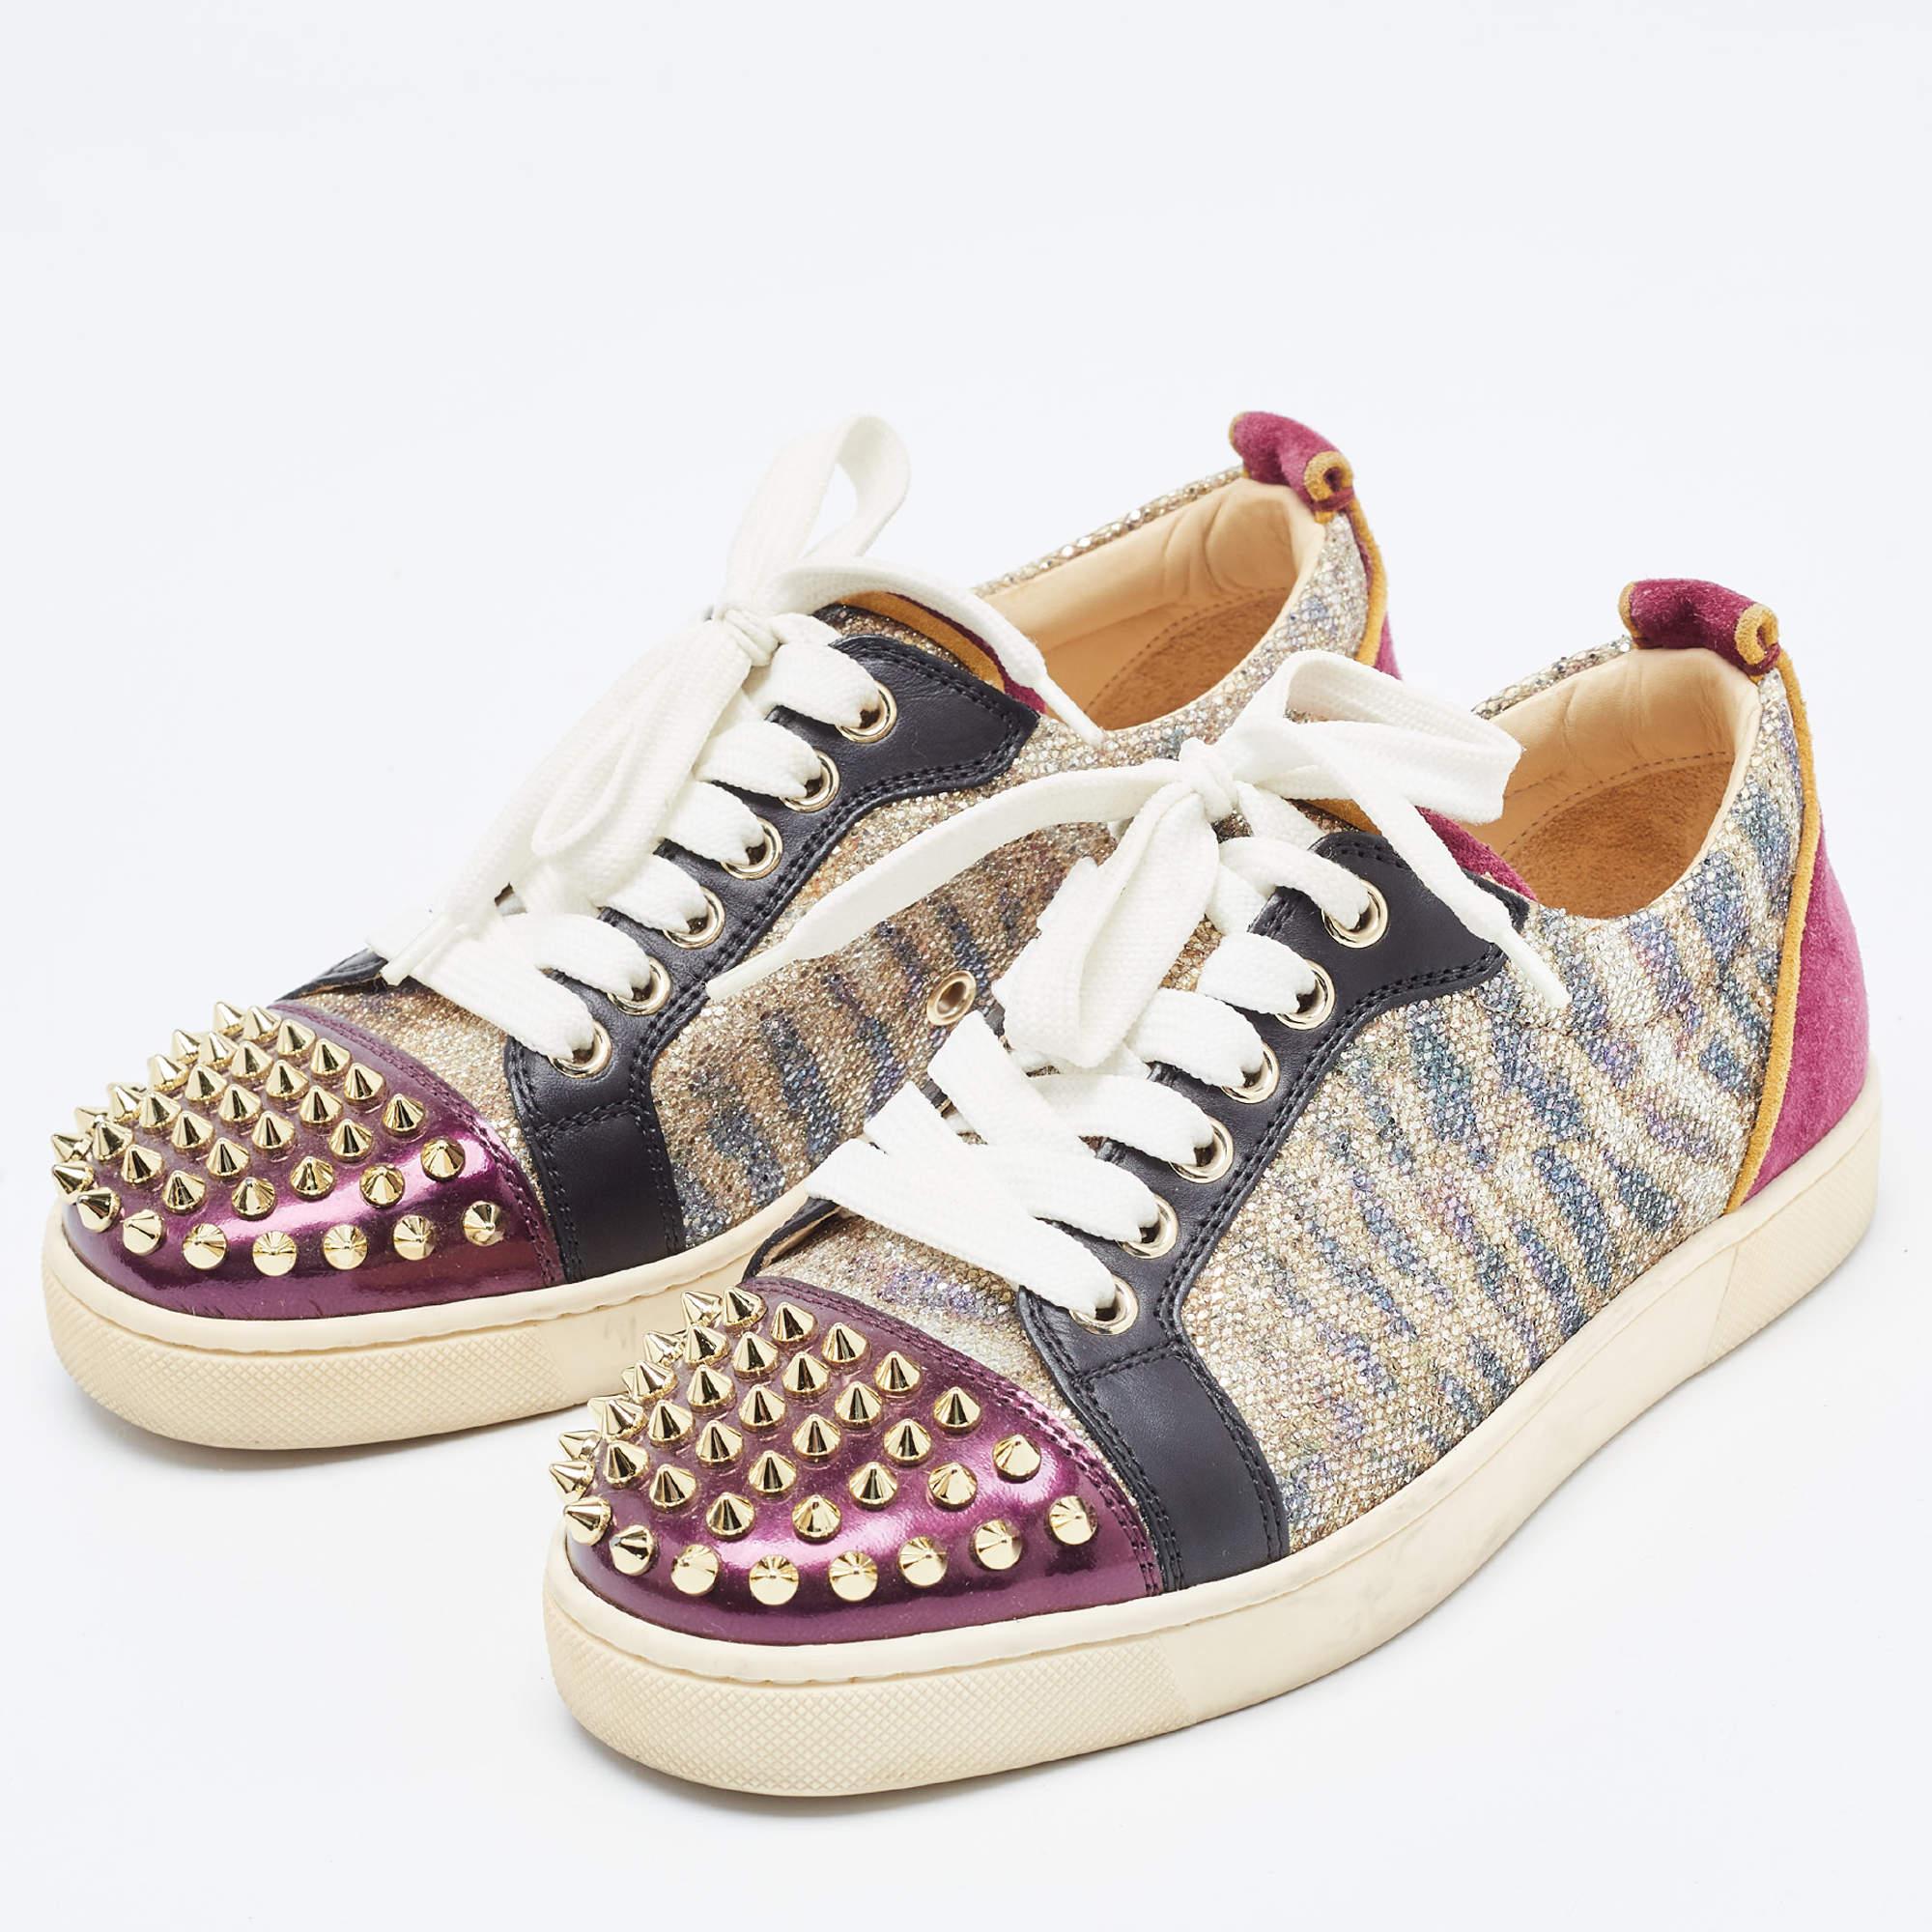 Christian Louboutin Multicolor Glitter Spikes Louis Junior Sneakers Size 35 For Sale 1